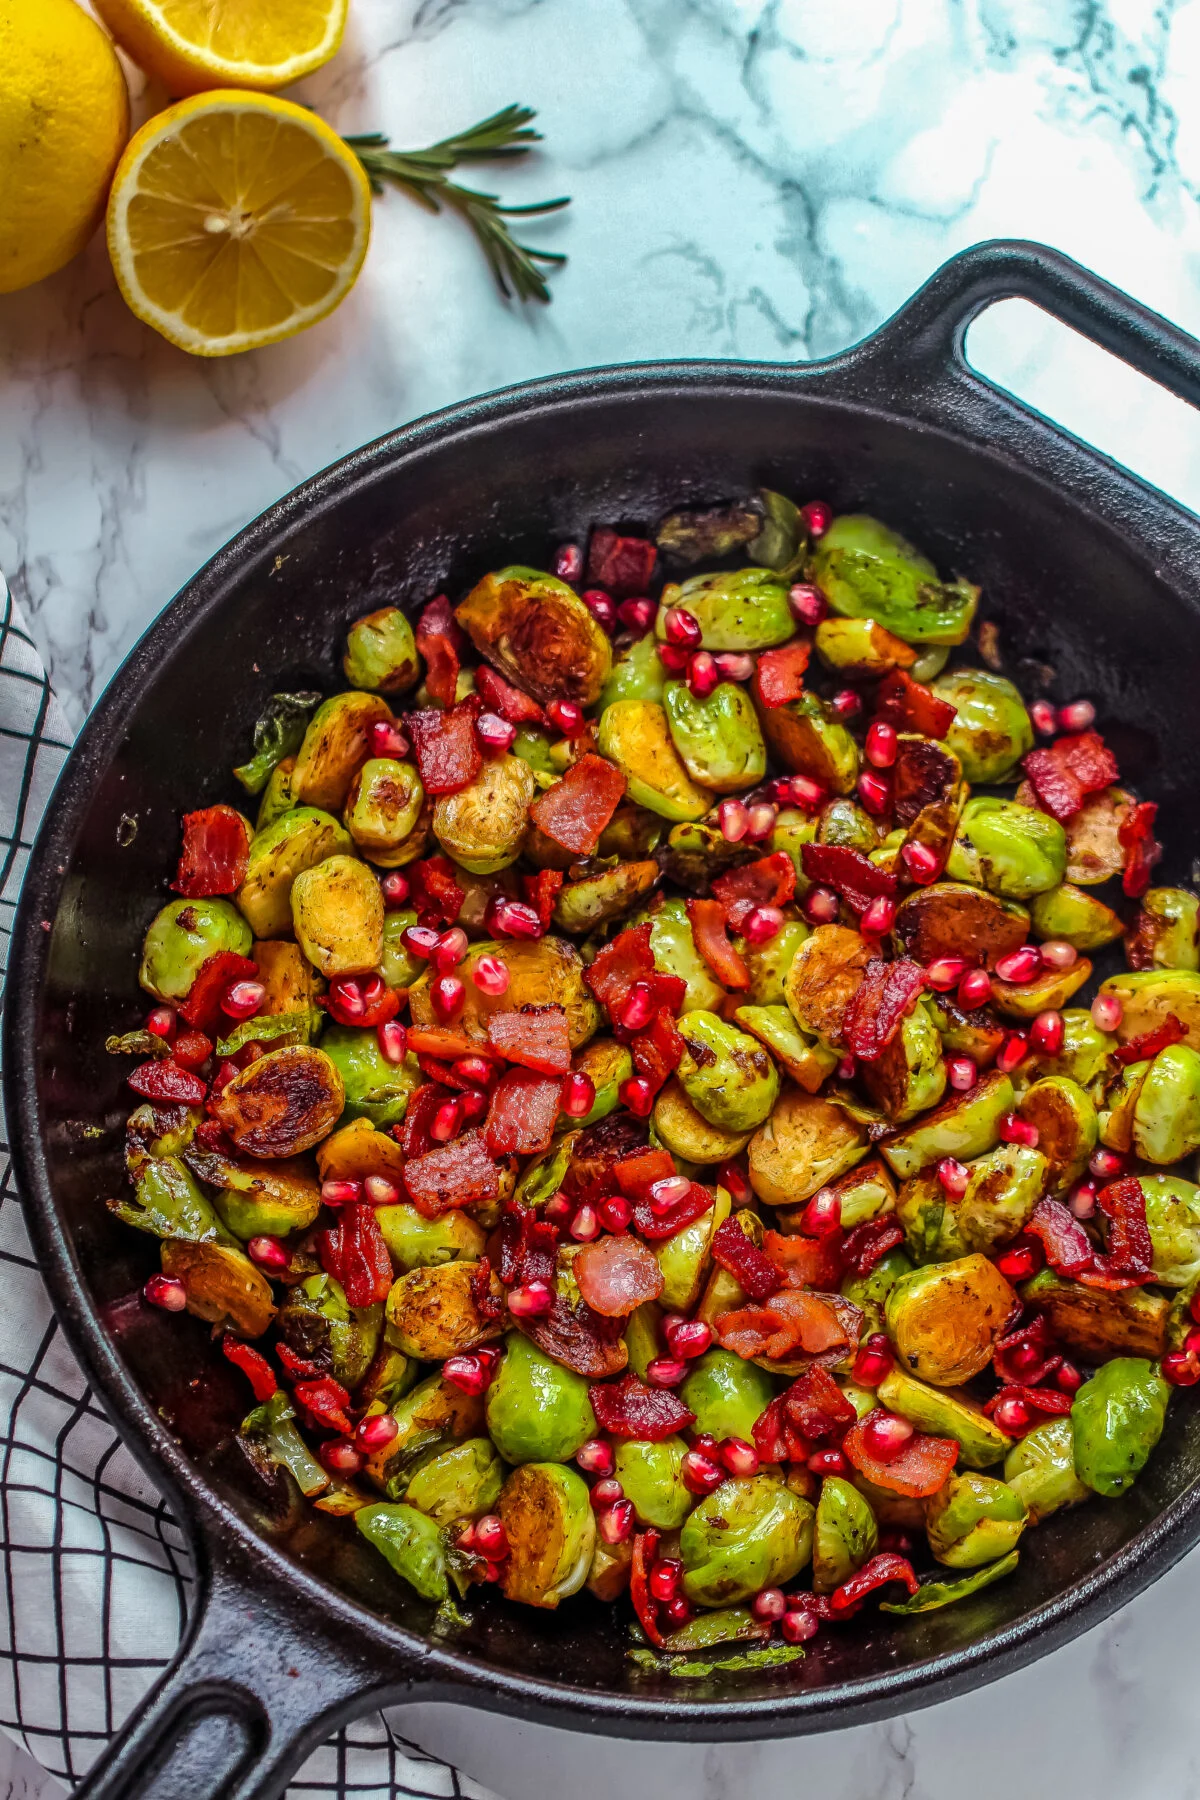 Pan Roasted Brussels Sprouts with Bacon & Pomegranate makes for a tasty holiday side dish that works just as easily for a weeknight side.